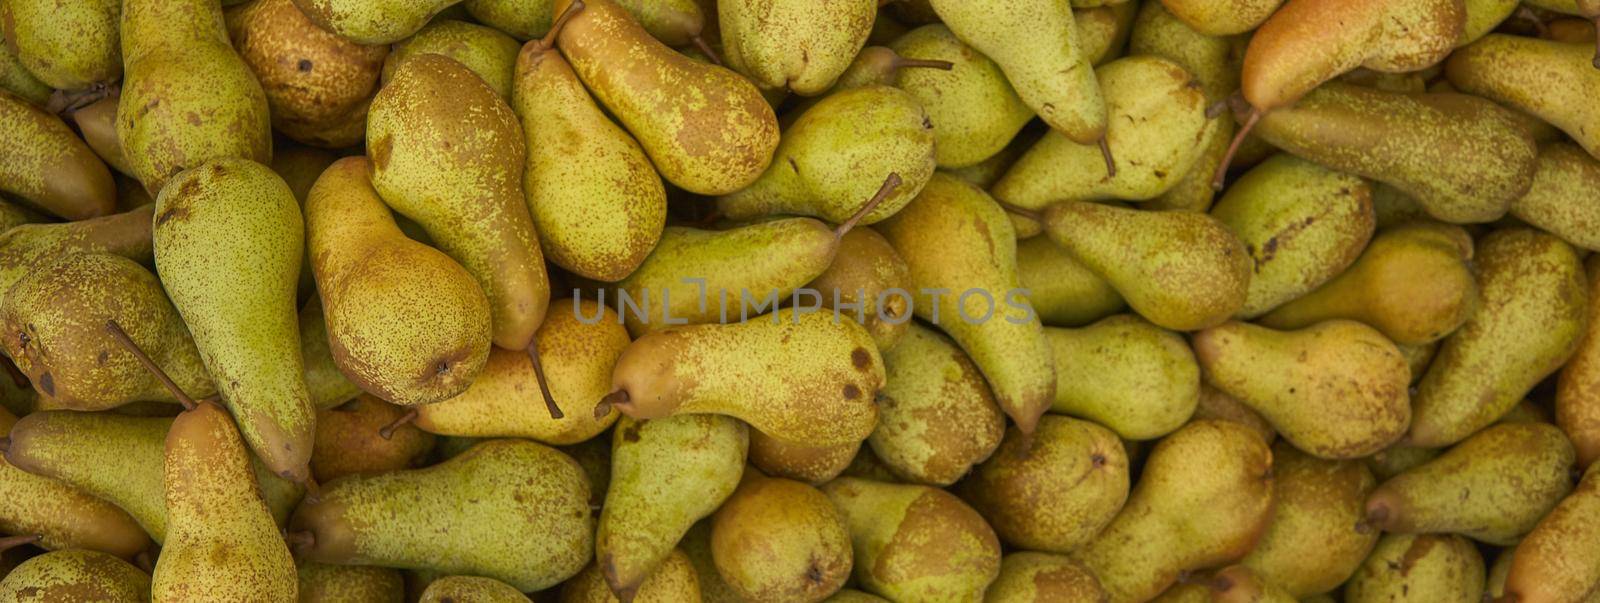 Pear texture detail, banner image with copy space